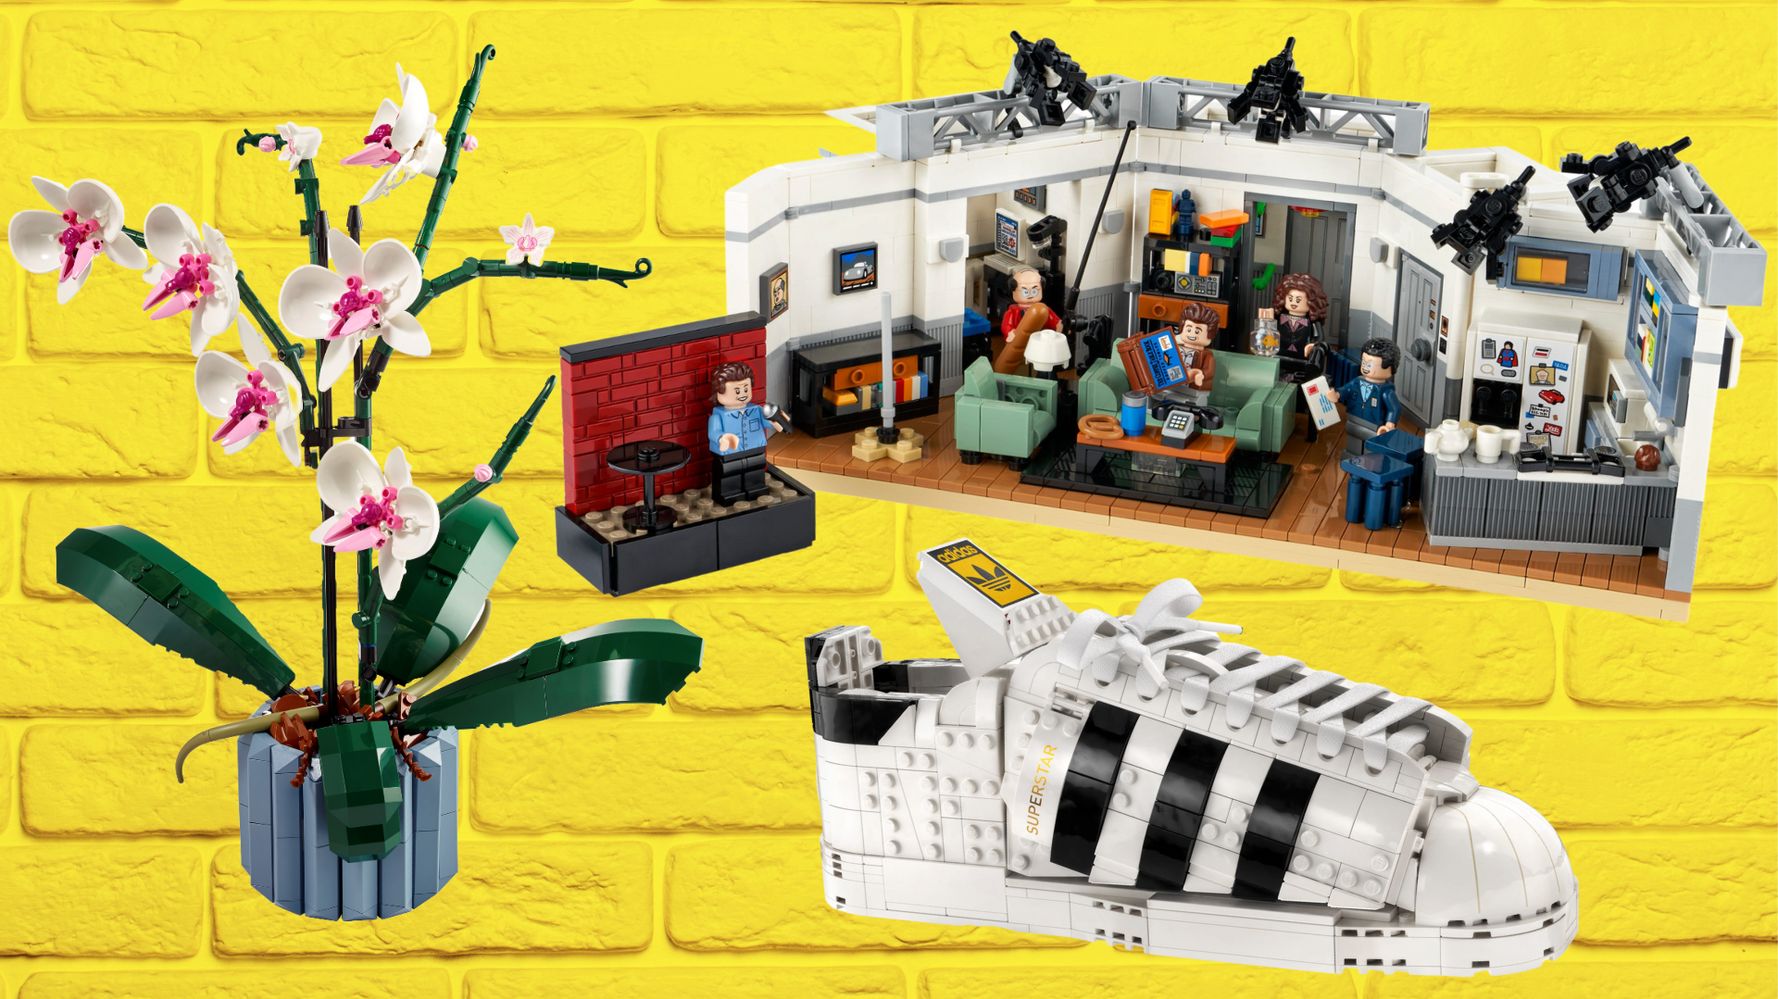 These Are The 17 Best Adult LEGO Sets To Build Right Now